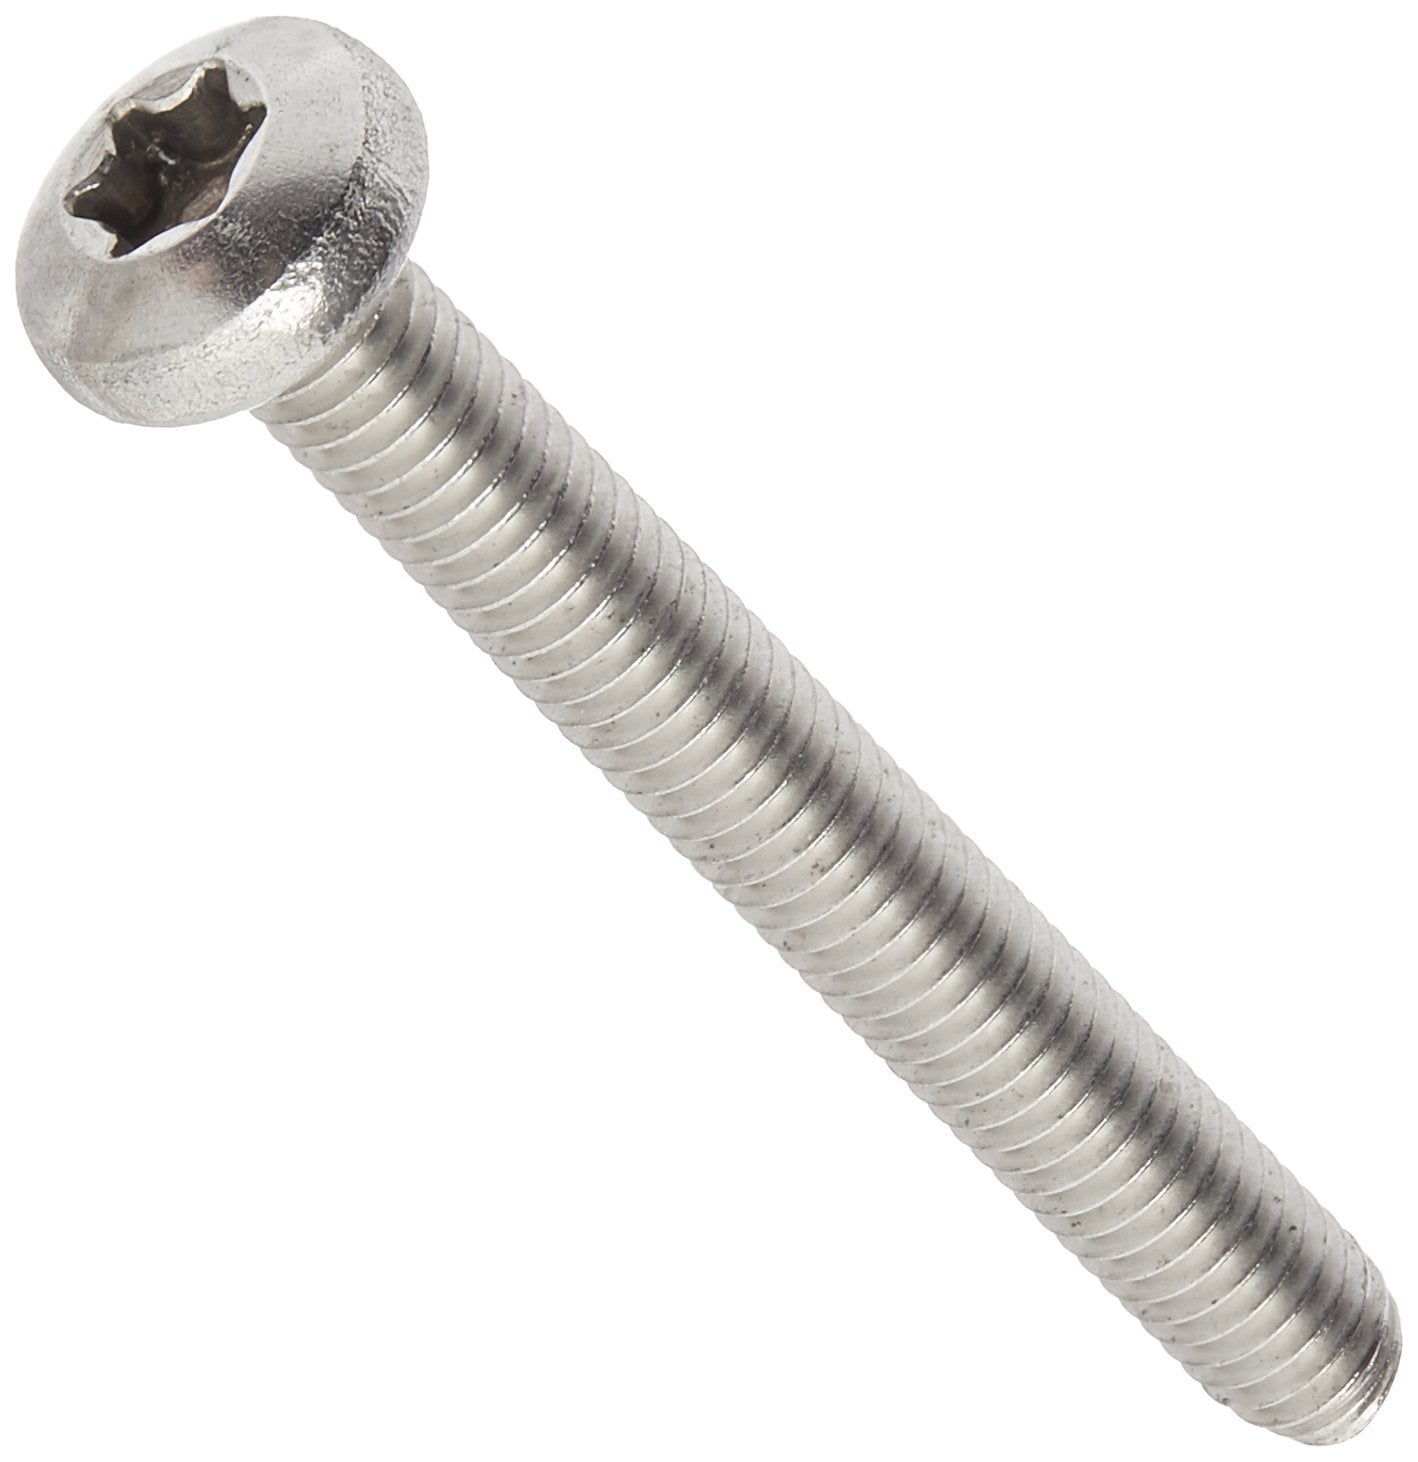 Pack of 25 18-8 Stainless Steel Pan Head Machine Screw M4-0.7 Thread Size Import T20 Star Drive Meets ISO 7045 10 mm Length Fully Threaded 